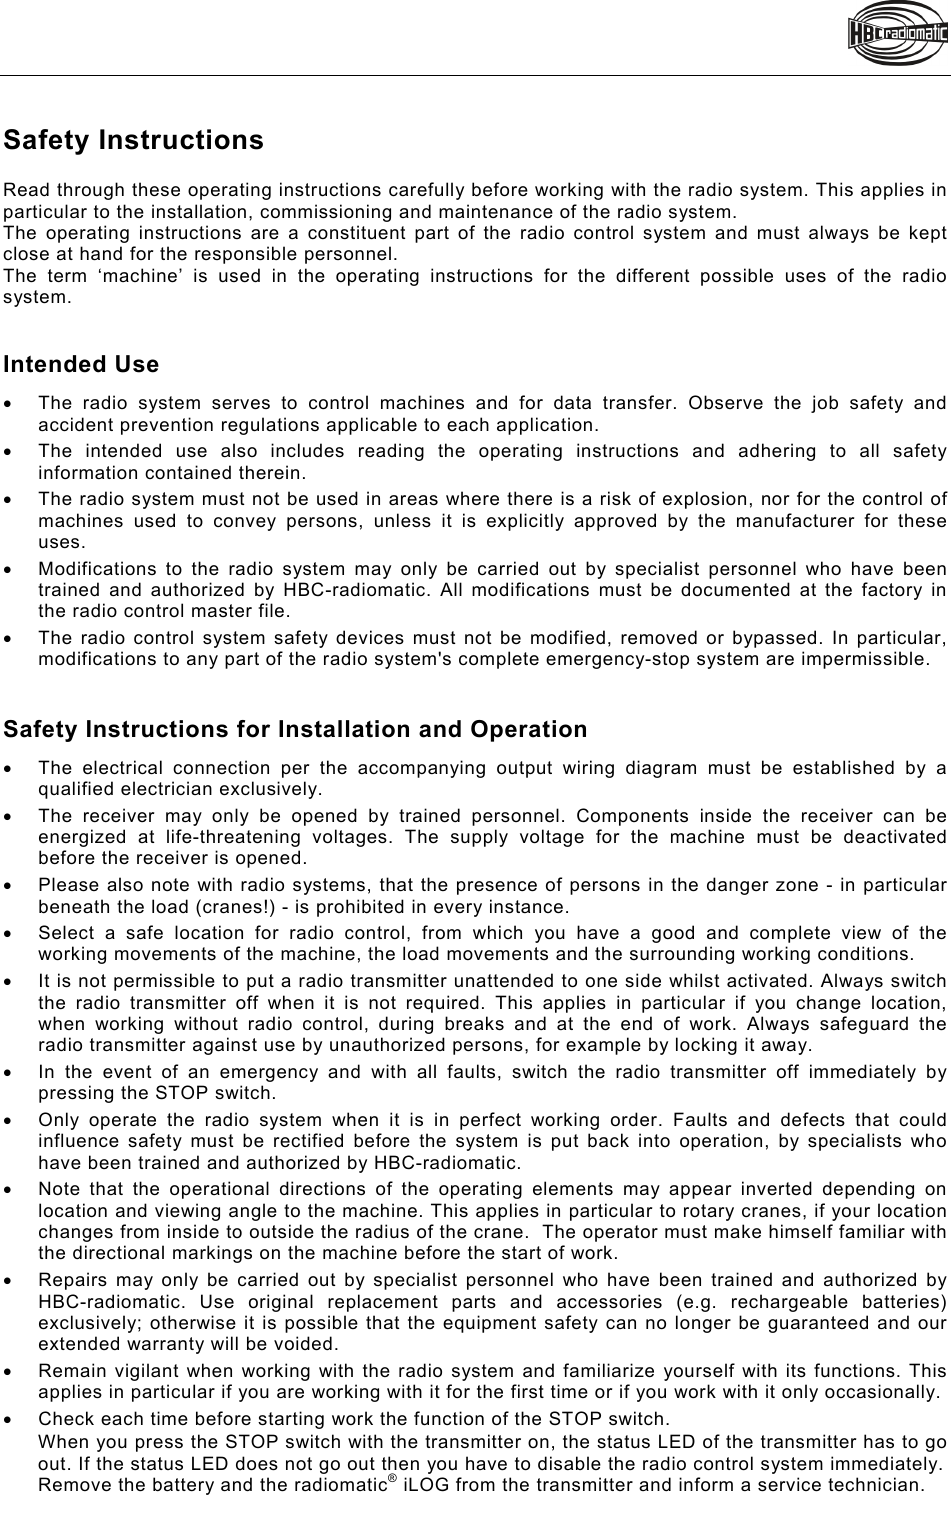    Safety Instructions Read through these operating instructions carefully before working with the radio system. This applies in particular to the installation, commissioning and maintenance of the radio system.  The operating instructions are a constituent part of the radio control system and must always be kept close at hand for the responsible personnel.  The term ‘machine’ is used in the operating instructions for the different possible uses of the radio system.   Intended Use   The radio system serves to control machines and for data transfer. Observe the job safety and accident prevention regulations applicable to each application.   The intended use also includes reading the operating instructions and adhering to all safety information contained therein.   The radio system must not be used in areas where there is a risk of explosion, nor for the control of machines used to convey persons, unless it is explicitly approved by the manufacturer for these uses.   Modifications to the radio system may only be carried out by specialist personnel who have been trained and authorized by HBC-radiomatic. All modifications must be documented at the factory in the radio control master file.    The radio control system safety devices must not be modified, removed or bypassed. In particular, modifications to any part of the radio system&apos;s complete emergency-stop system are impermissible.   Safety Instructions for Installation and Operation   The electrical connection per the accompanying output wiring diagram must be established by a qualified electrician exclusively.   The receiver may only be opened by trained personnel. Components inside the receiver can be energized at life-threatening voltages. The supply voltage for the machine must be deactivated before the receiver is opened.    Please also note with radio systems, that the presence of persons in the danger zone - in particular beneath the load (cranes!) - is prohibited in every instance.   Select a safe location for radio control, from which you have a good and complete view of the working movements of the machine, the load movements and the surrounding working conditions.   It is not permissible to put a radio transmitter unattended to one side whilst activated. Always switch the radio transmitter off when it is not required. This applies in particular if you change location, when working without radio control, during breaks and at the end of work. Always safeguard the radio transmitter against use by unauthorized persons, for example by locking it away.   In the event of an emergency and with all faults, switch the radio transmitter off immediately by pressing the STOP switch.   Only operate the radio system when it is in perfect working order. Faults and defects that could influence safety must be rectified before the system is put back into operation, by specialists who have been trained and authorized by HBC-radiomatic.    Note that the operational directions of the operating elements may appear inverted depending on location and viewing angle to the machine. This applies in particular to rotary cranes, if your location changes from inside to outside the radius of the crane.  The operator must make himself familiar with the directional markings on the machine before the start of work.    Repairs may only be carried out by specialist personnel who have been trained and authorized by HBC-radiomatic. Use original replacement parts and accessories (e.g. rechargeable batteries) exclusively; otherwise it is possible that the equipment safety can no longer be guaranteed and our extended warranty will be voided.    Remain vigilant when working with the radio system and familiarize yourself with its functions. This applies in particular if you are working with it for the first time or if you work with it only occasionally.    Check each time before starting work the function of the STOP switch. When you press the STOP switch with the transmitter on, the status LED of the transmitter has to go out. If the status LED does not go out then you have to disable the radio control system immediately. Remove the battery and the radiomatic® iLOG from the transmitter and inform a service technician. 